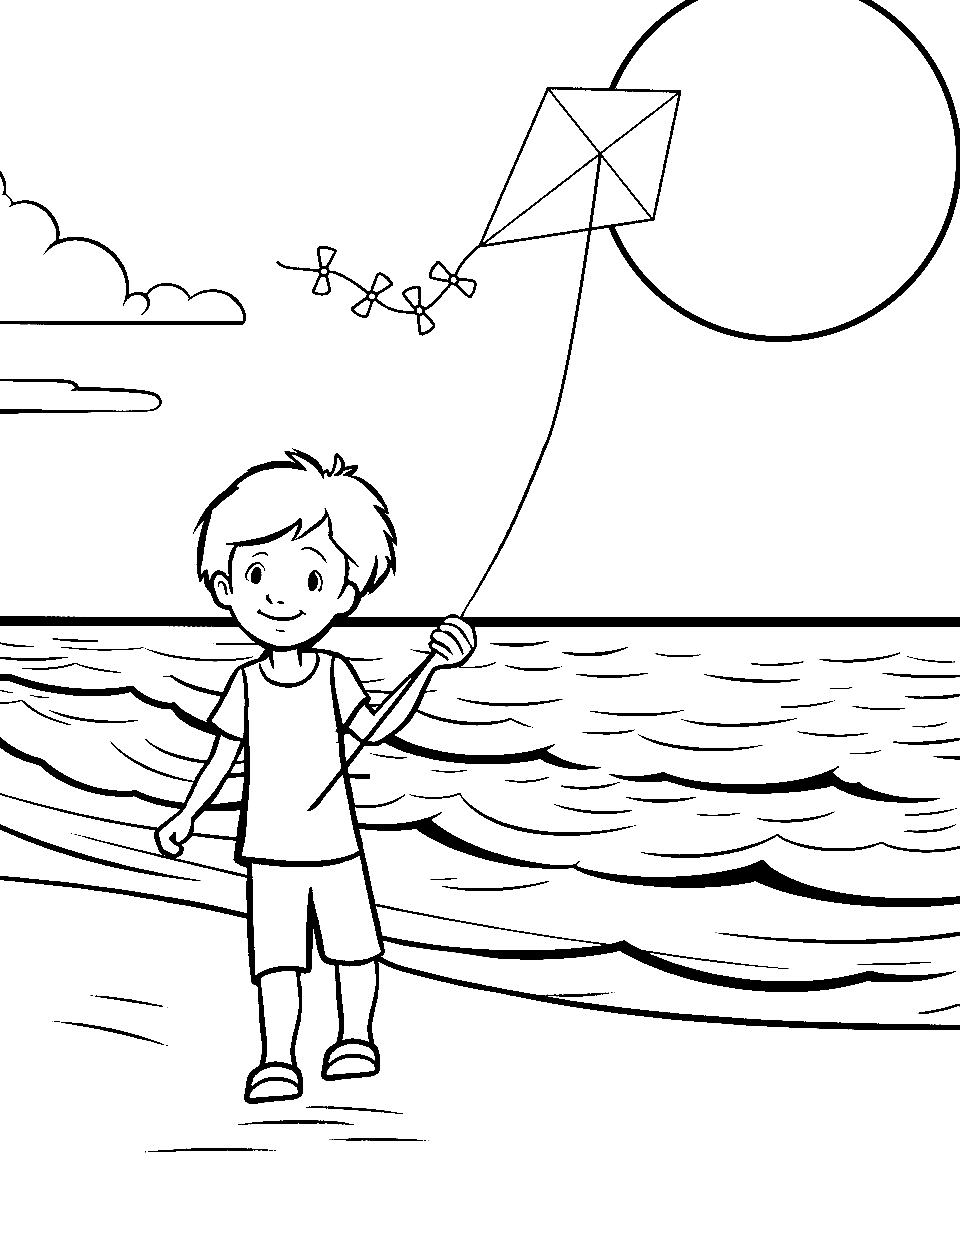 Summer Beach Fun Ocean Coloring Page - A sunny beach scene with waves, sand, and a kid flying a kite.